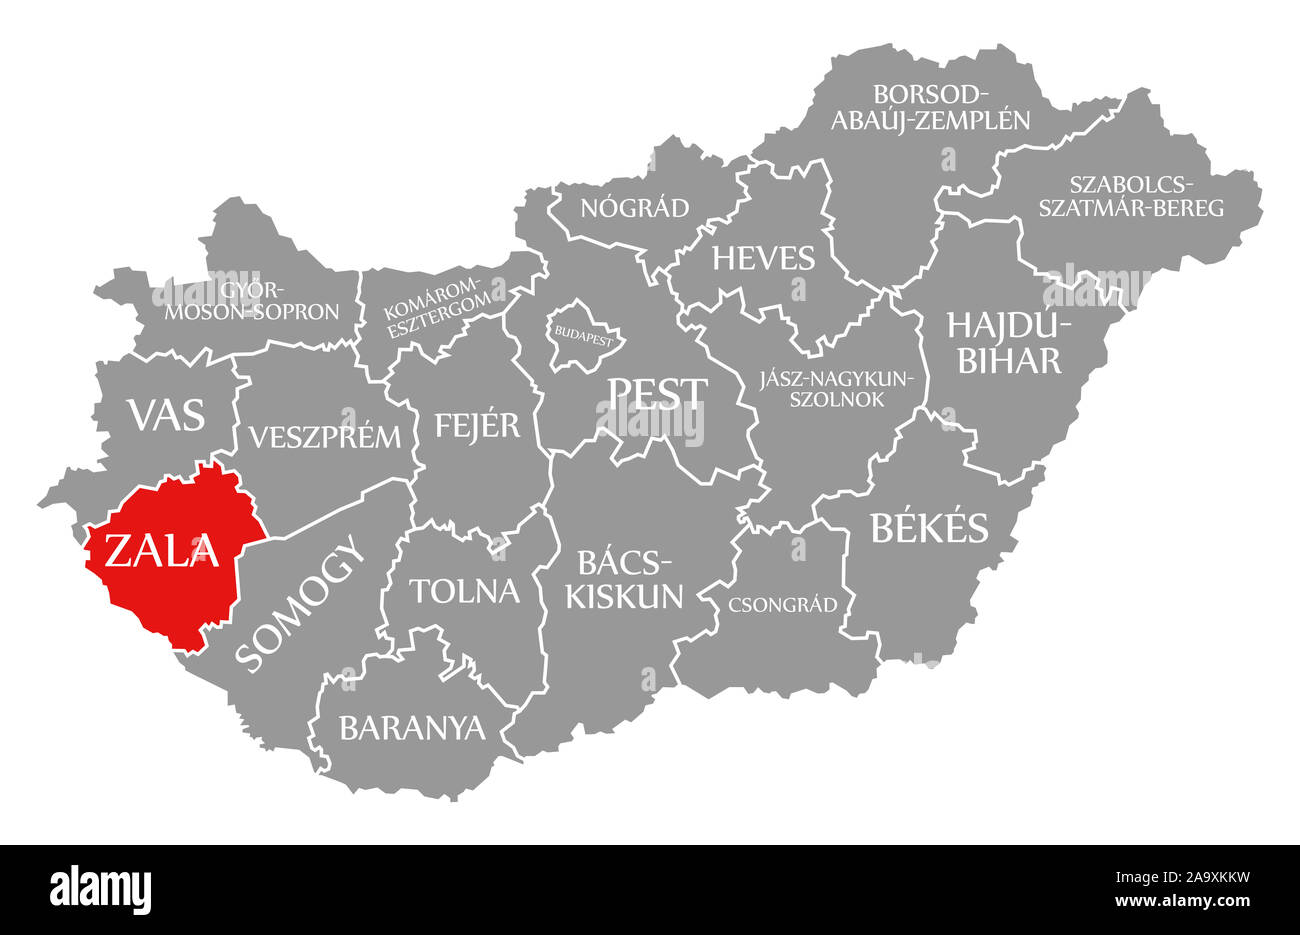 Zala red highlighted in map of Hungary Stock Photo